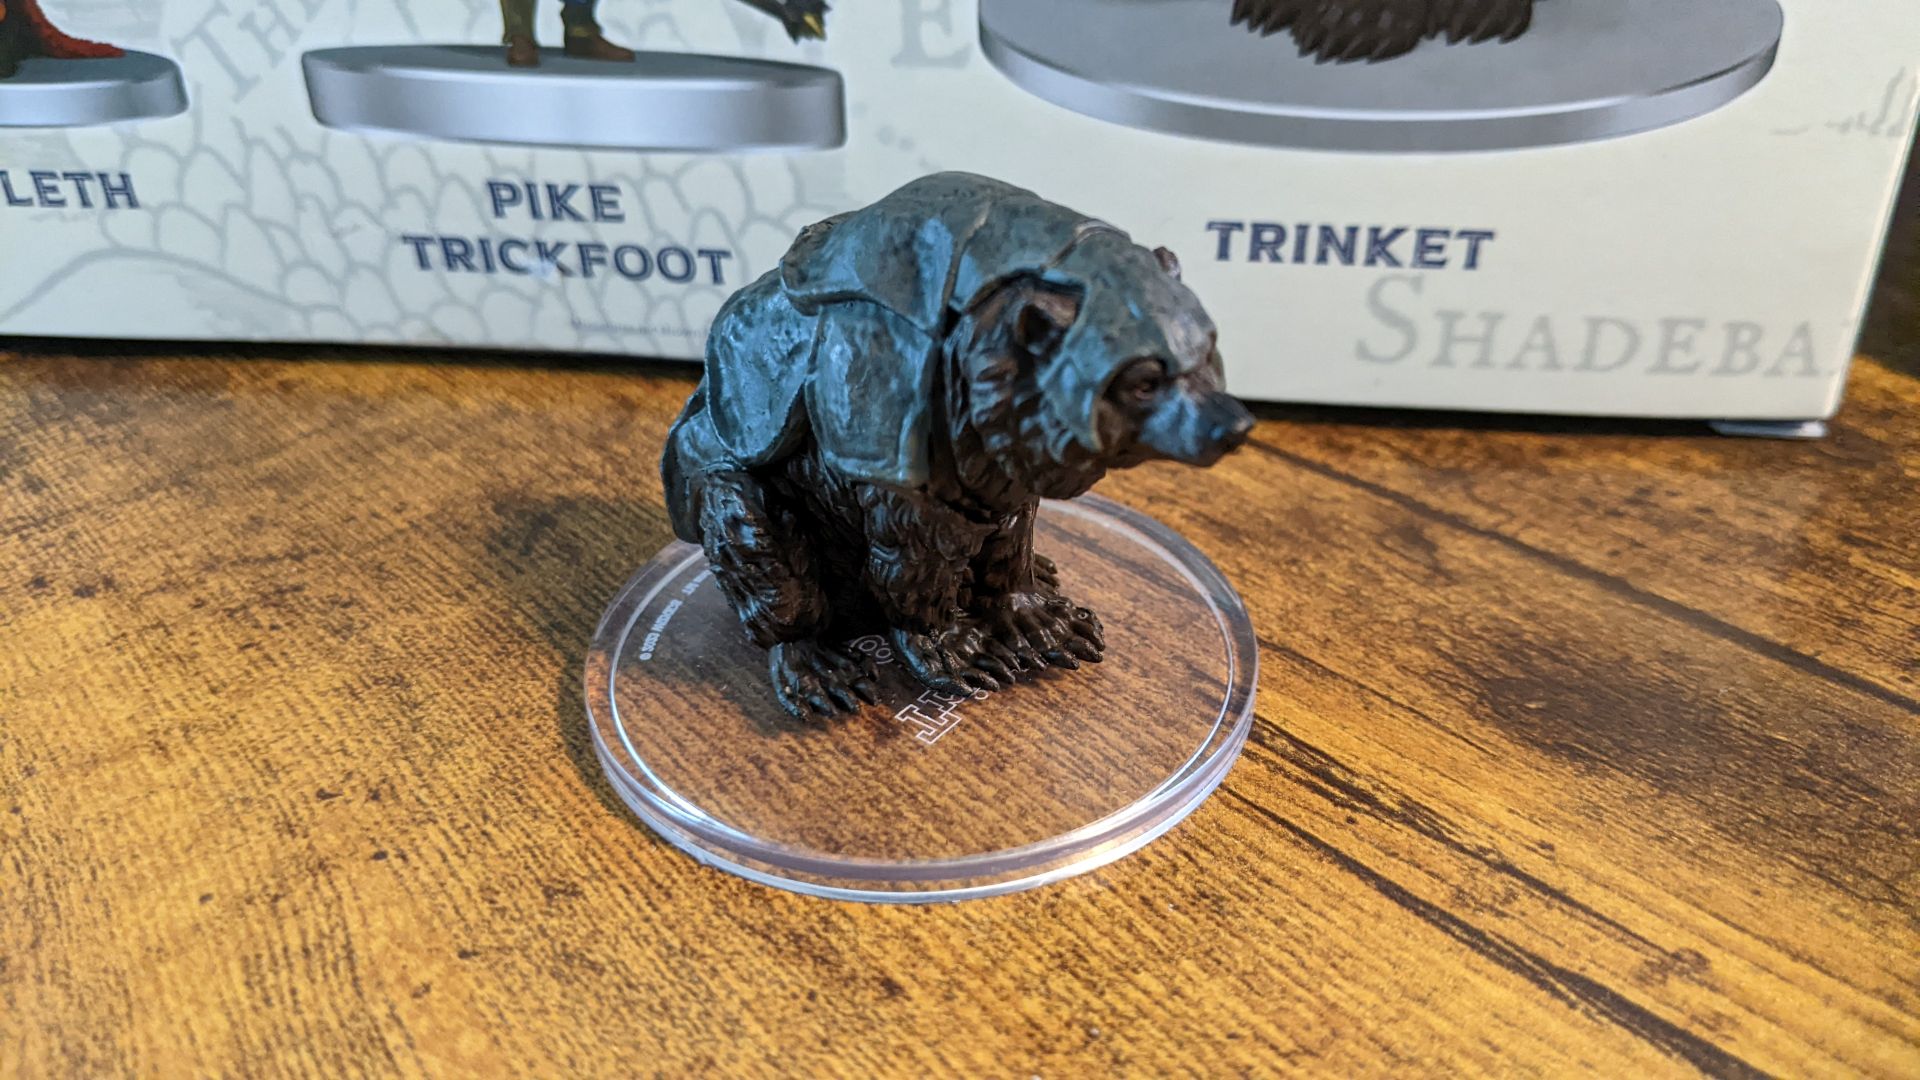 The miniature for Trinket the bear from Vox Machina from the Wizkids Critical Role line